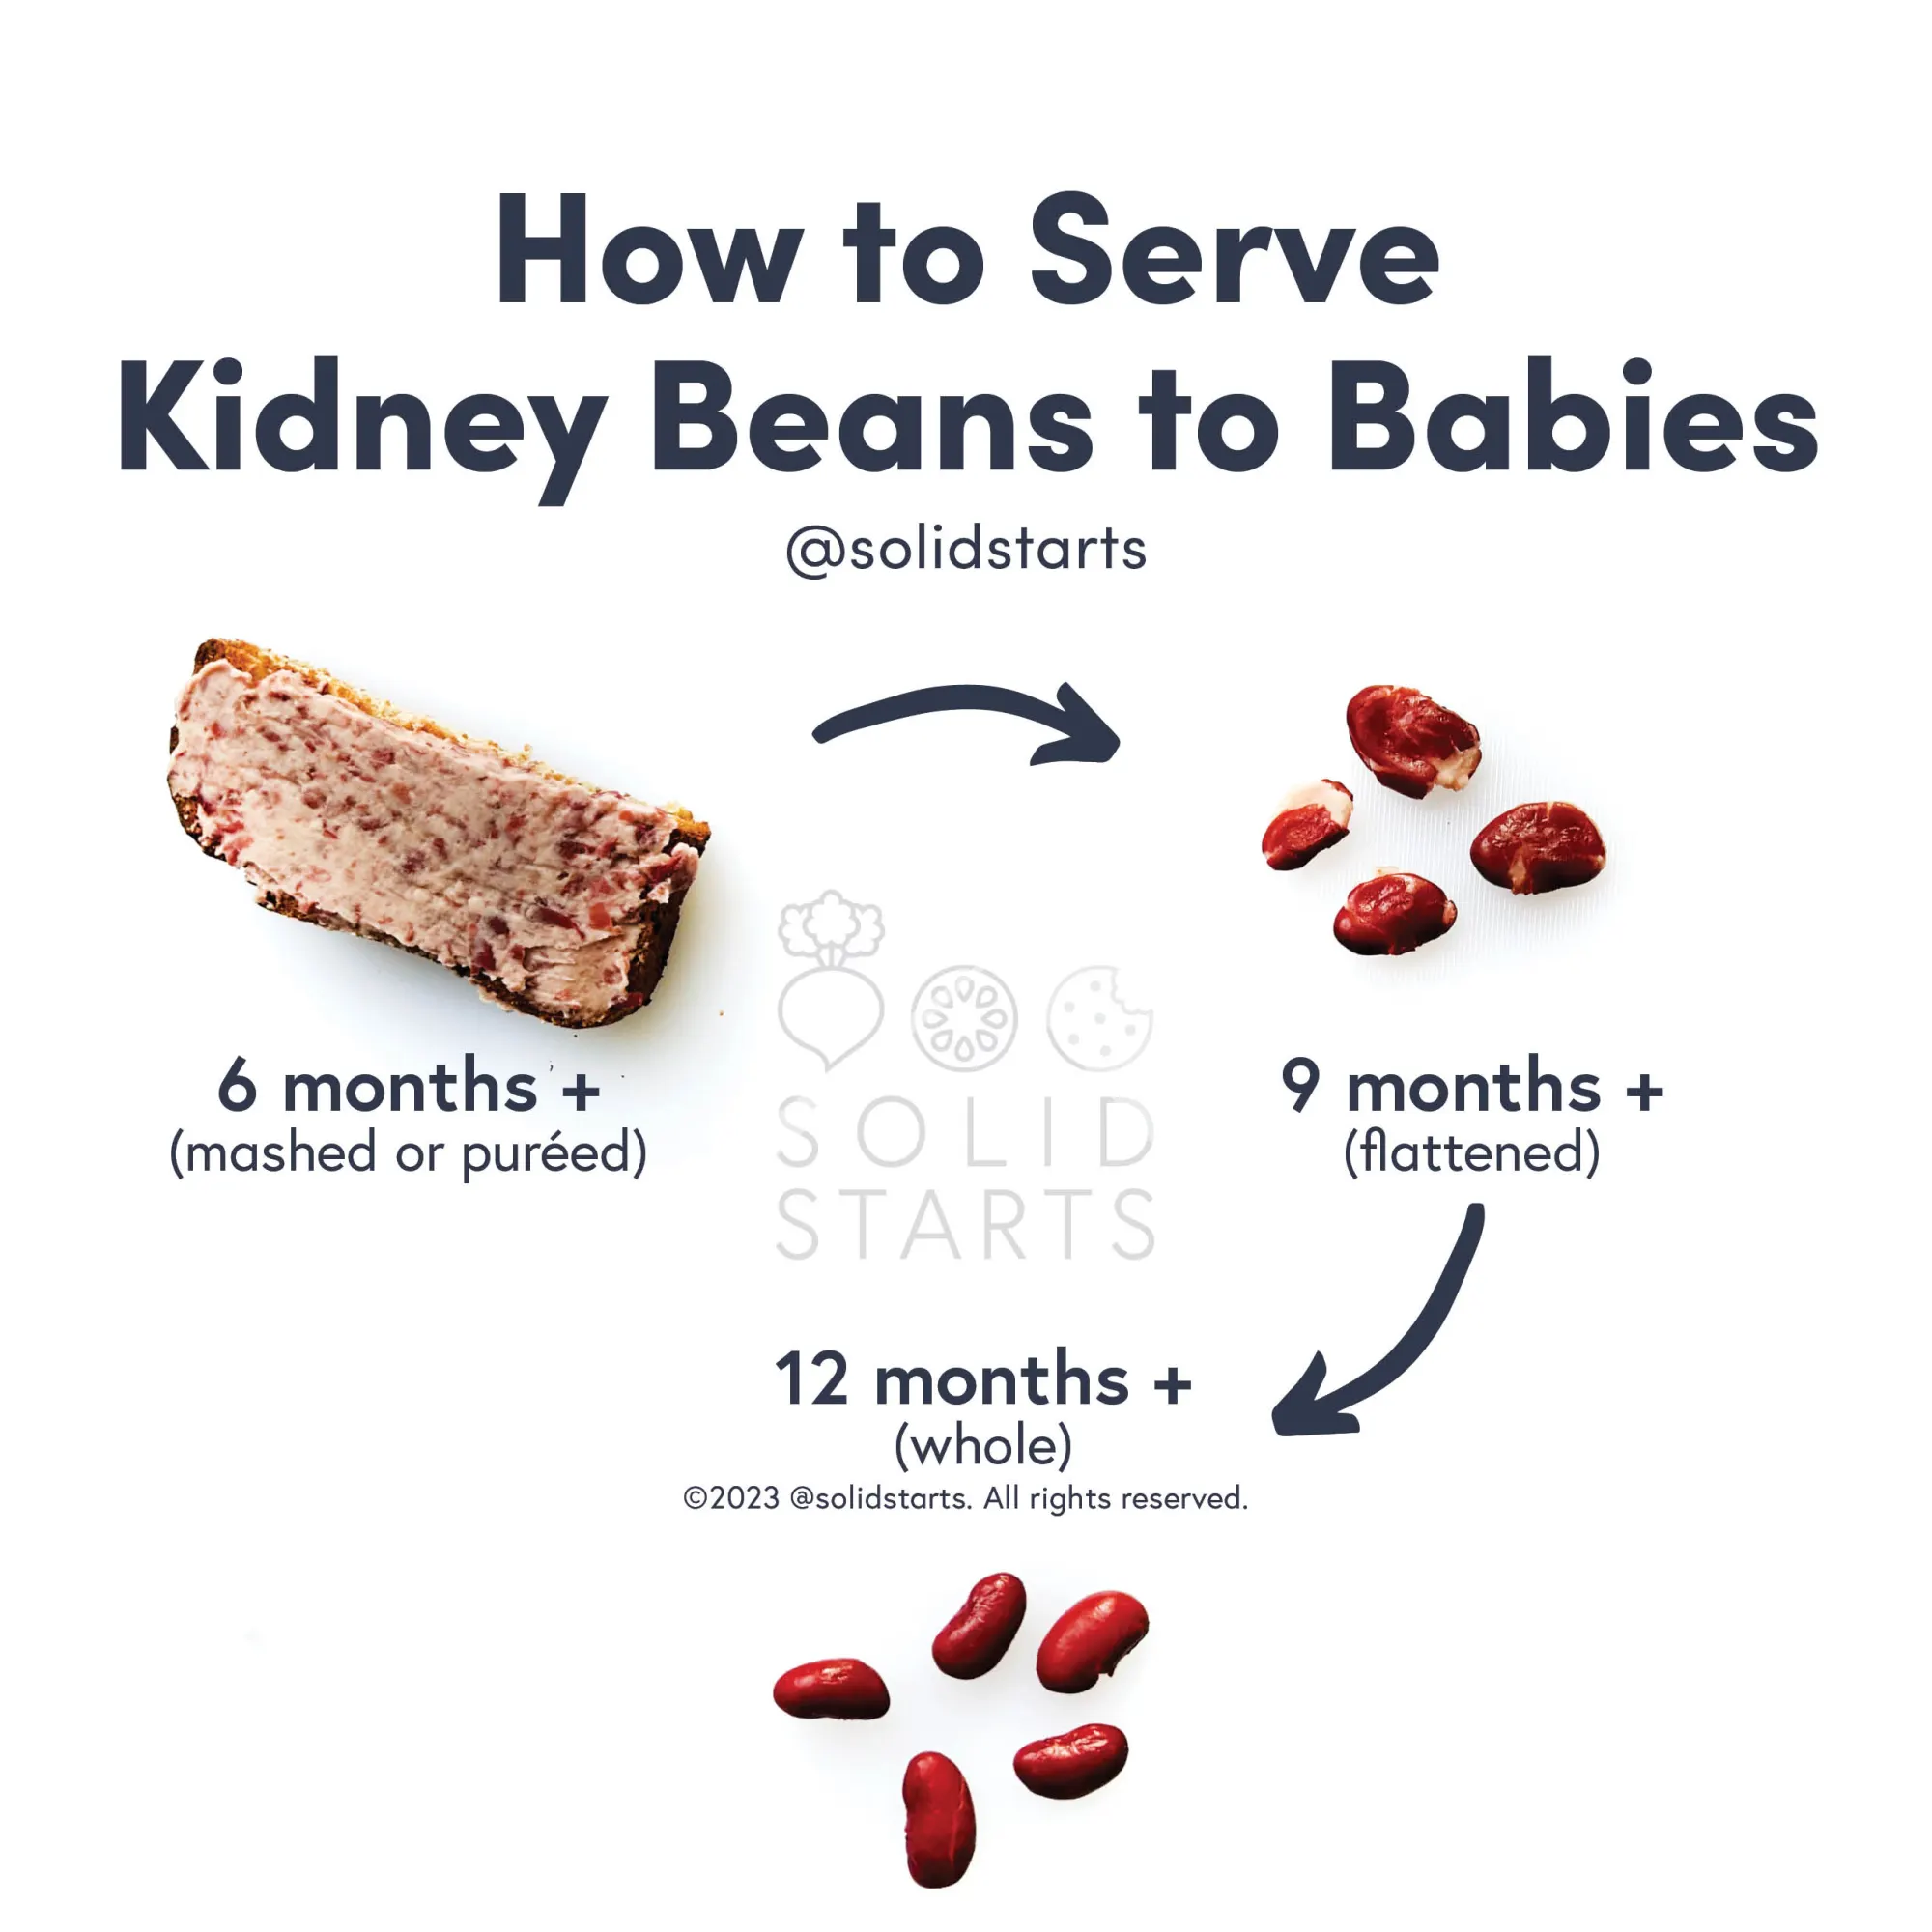 a Solid Starts infographic with the header How to Serve Kidney Beans to Babies: mashed or pureed for 6 months+, flattened for 9 months+, whole for 12 months+